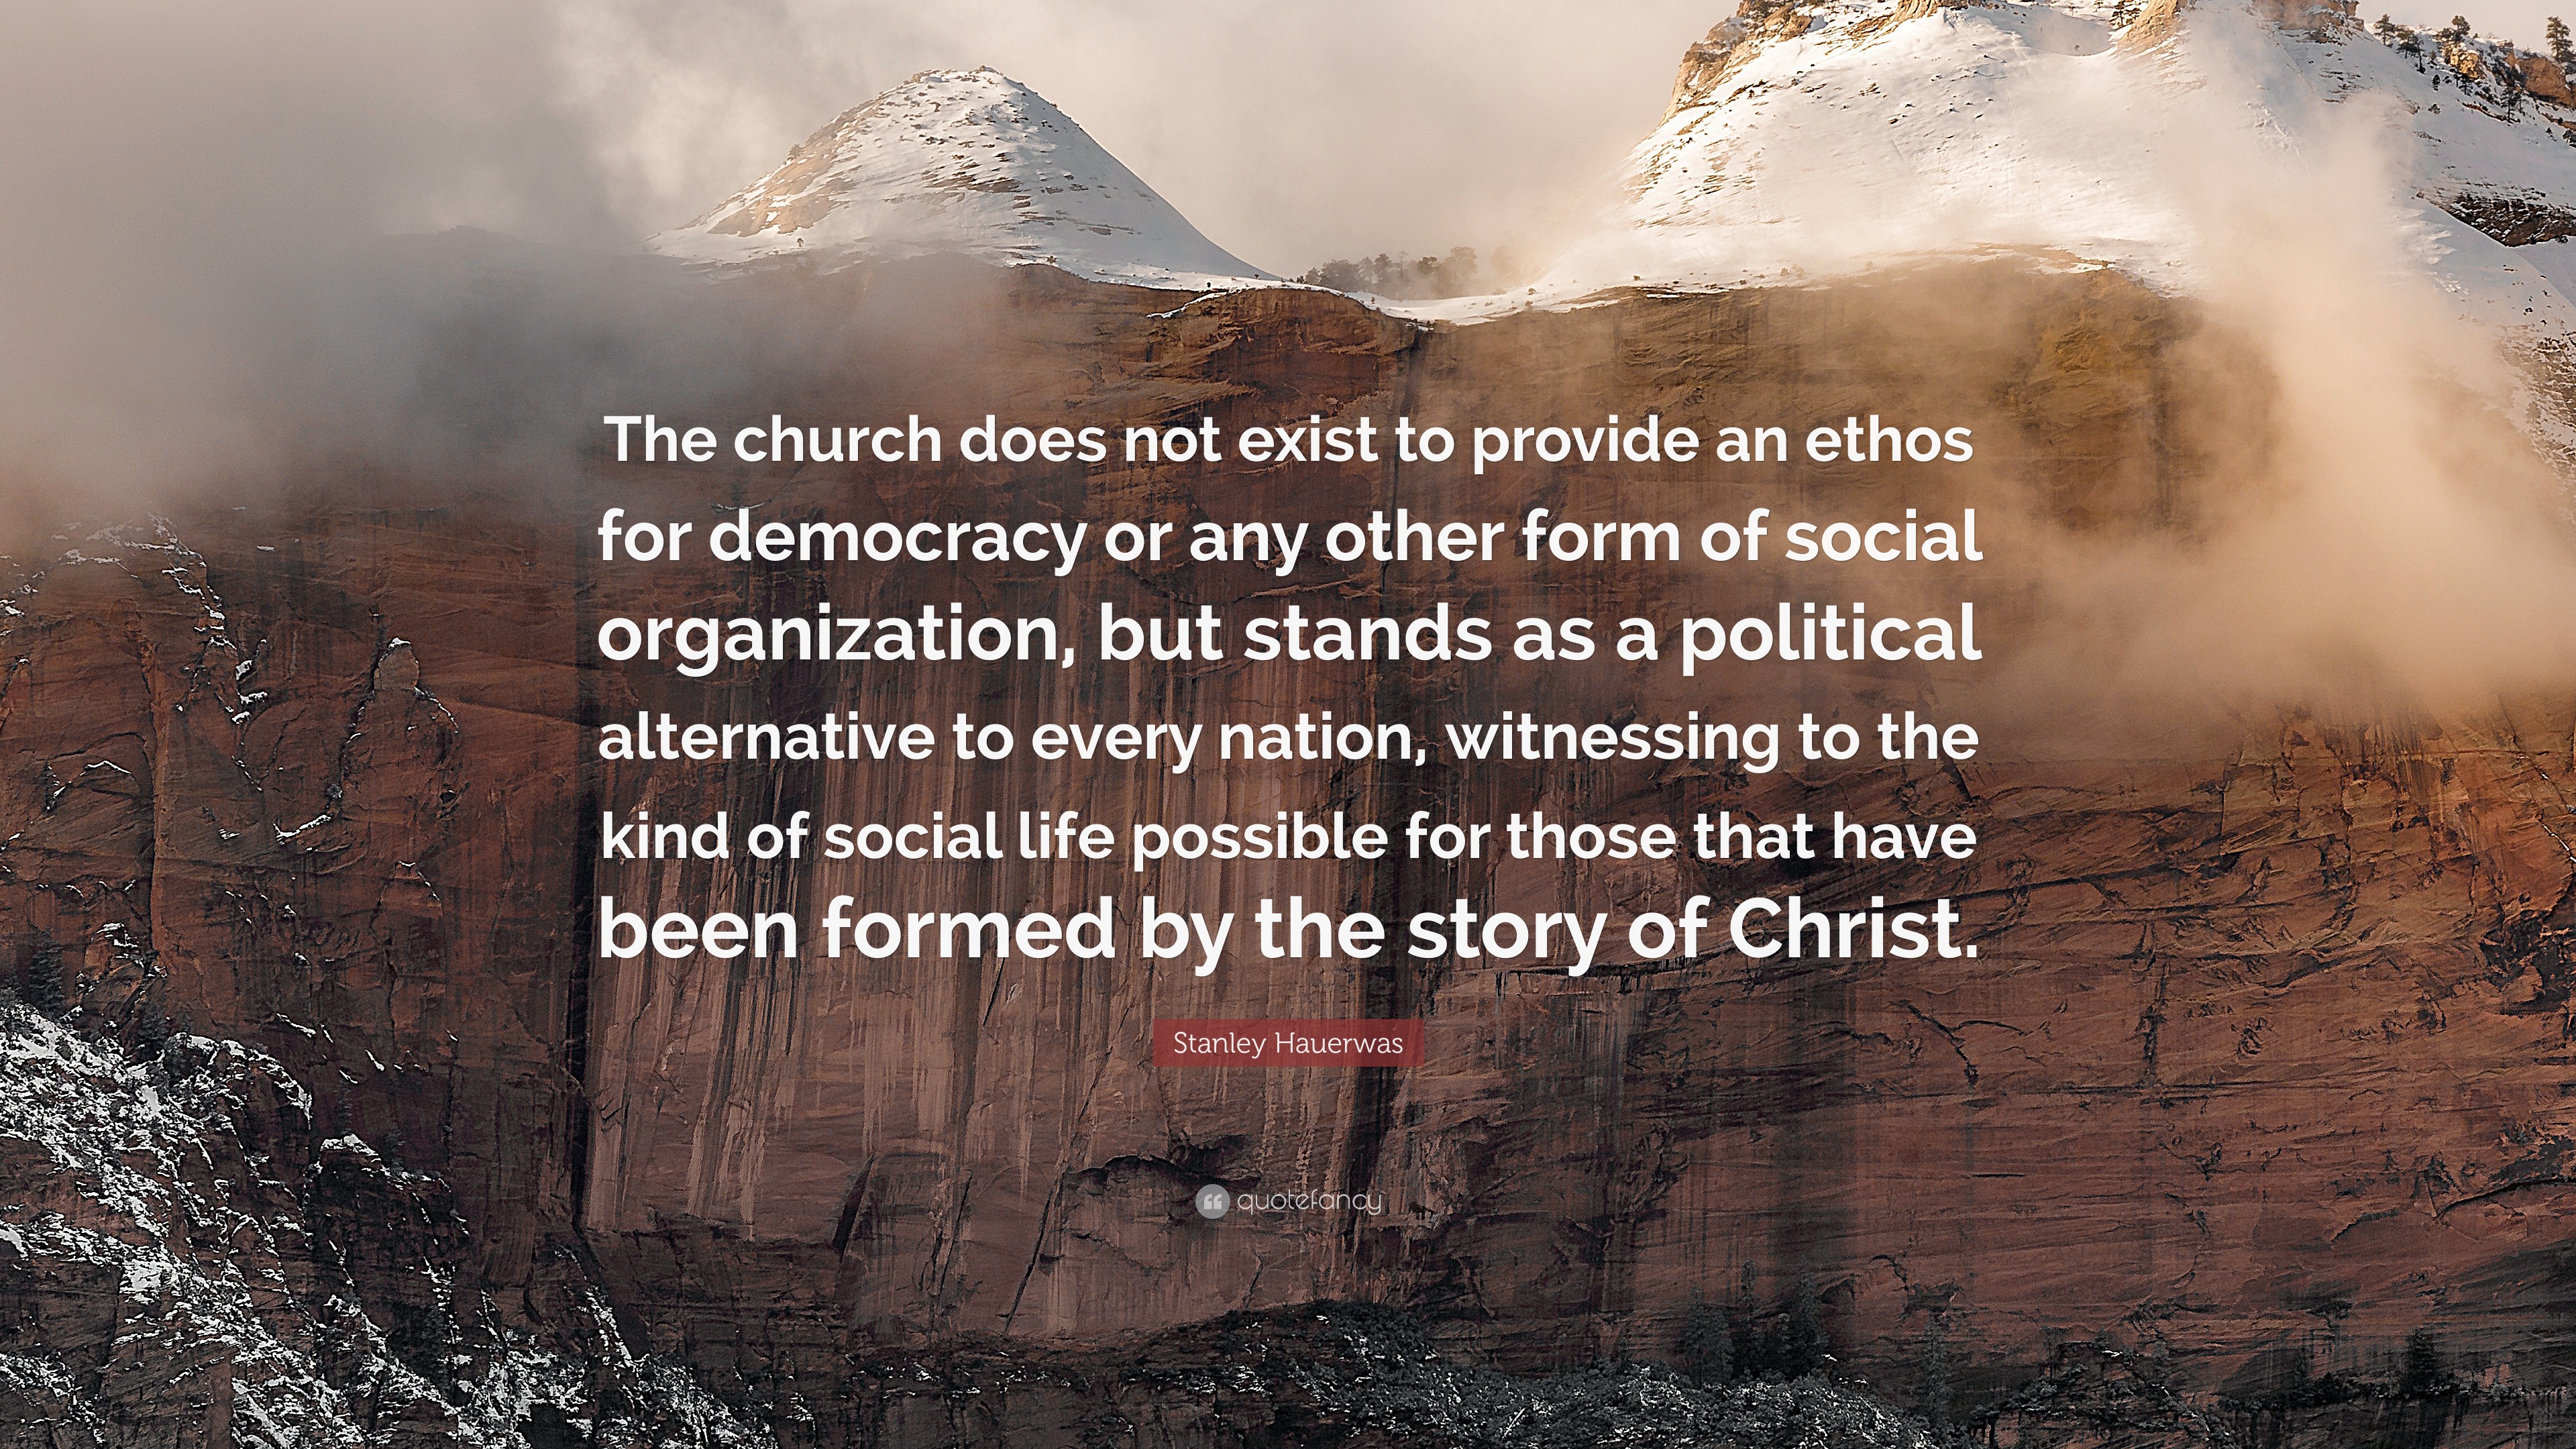 Stanley Hauerwas Quote: “The Church Does Not Exist To Provide An Ethos For Democracy Or Any Other Form Of Social Organization, But Stands As A Po...”